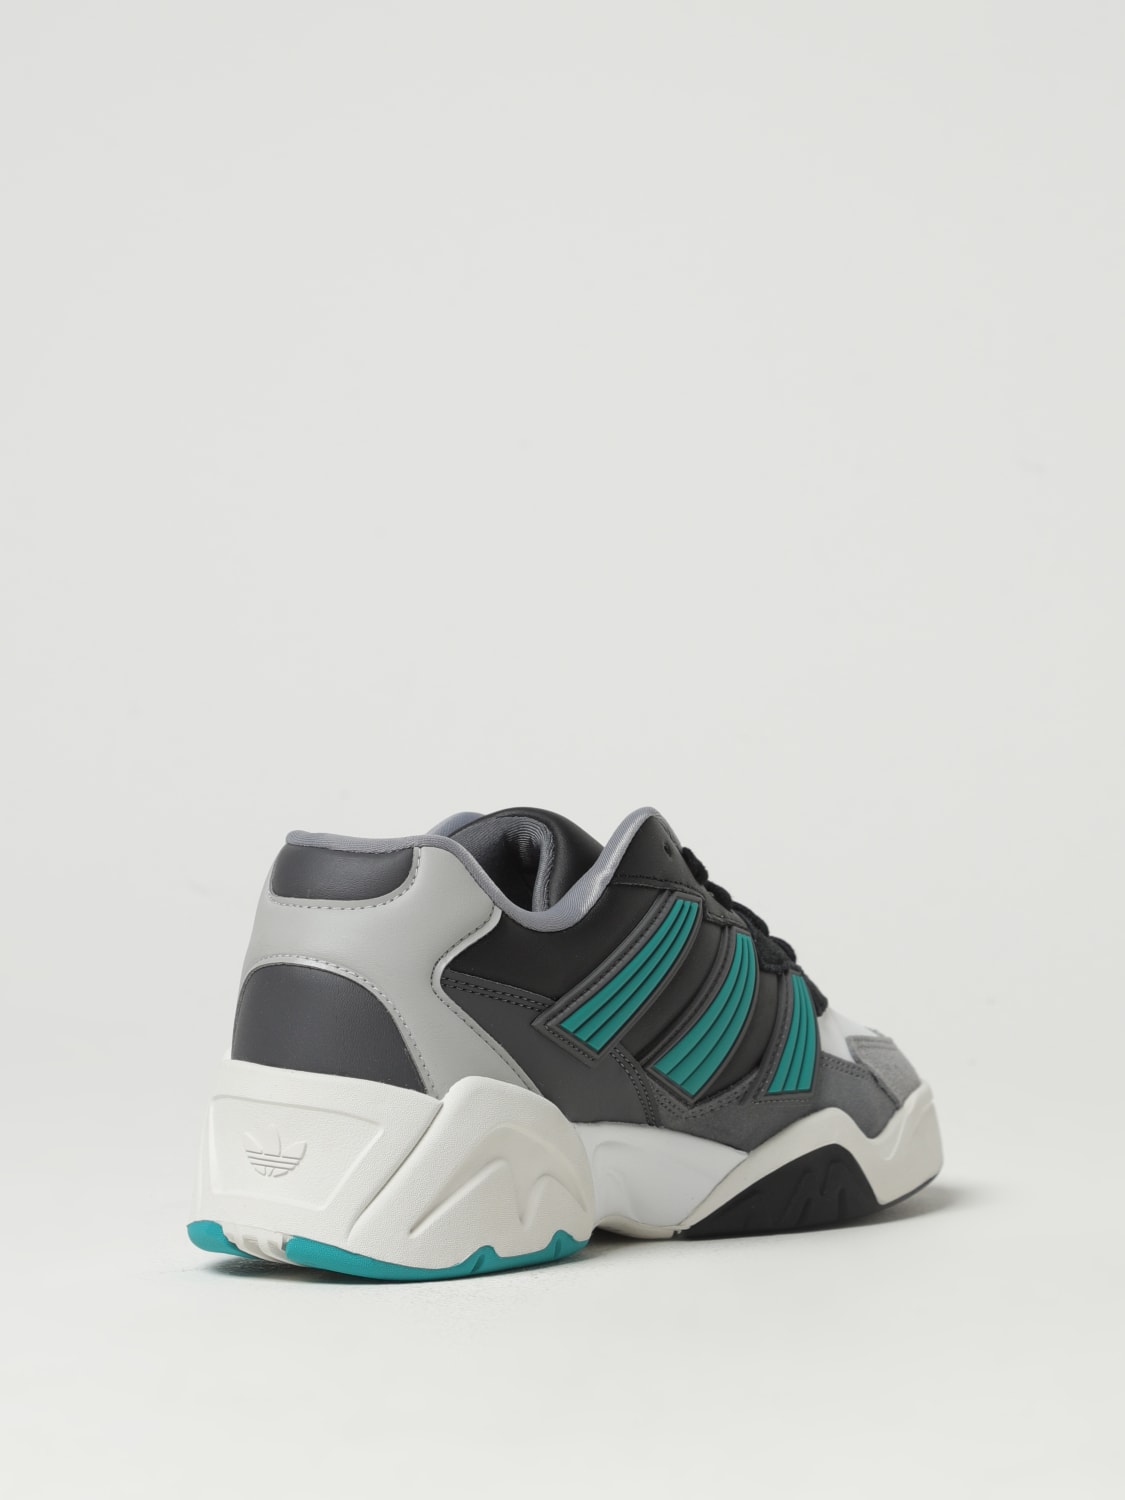 Court online ORIGINALS: Adidas leather IF5378 at rubber | sneakers and ADIDAS in - Grey sneakers Magnetic Originals